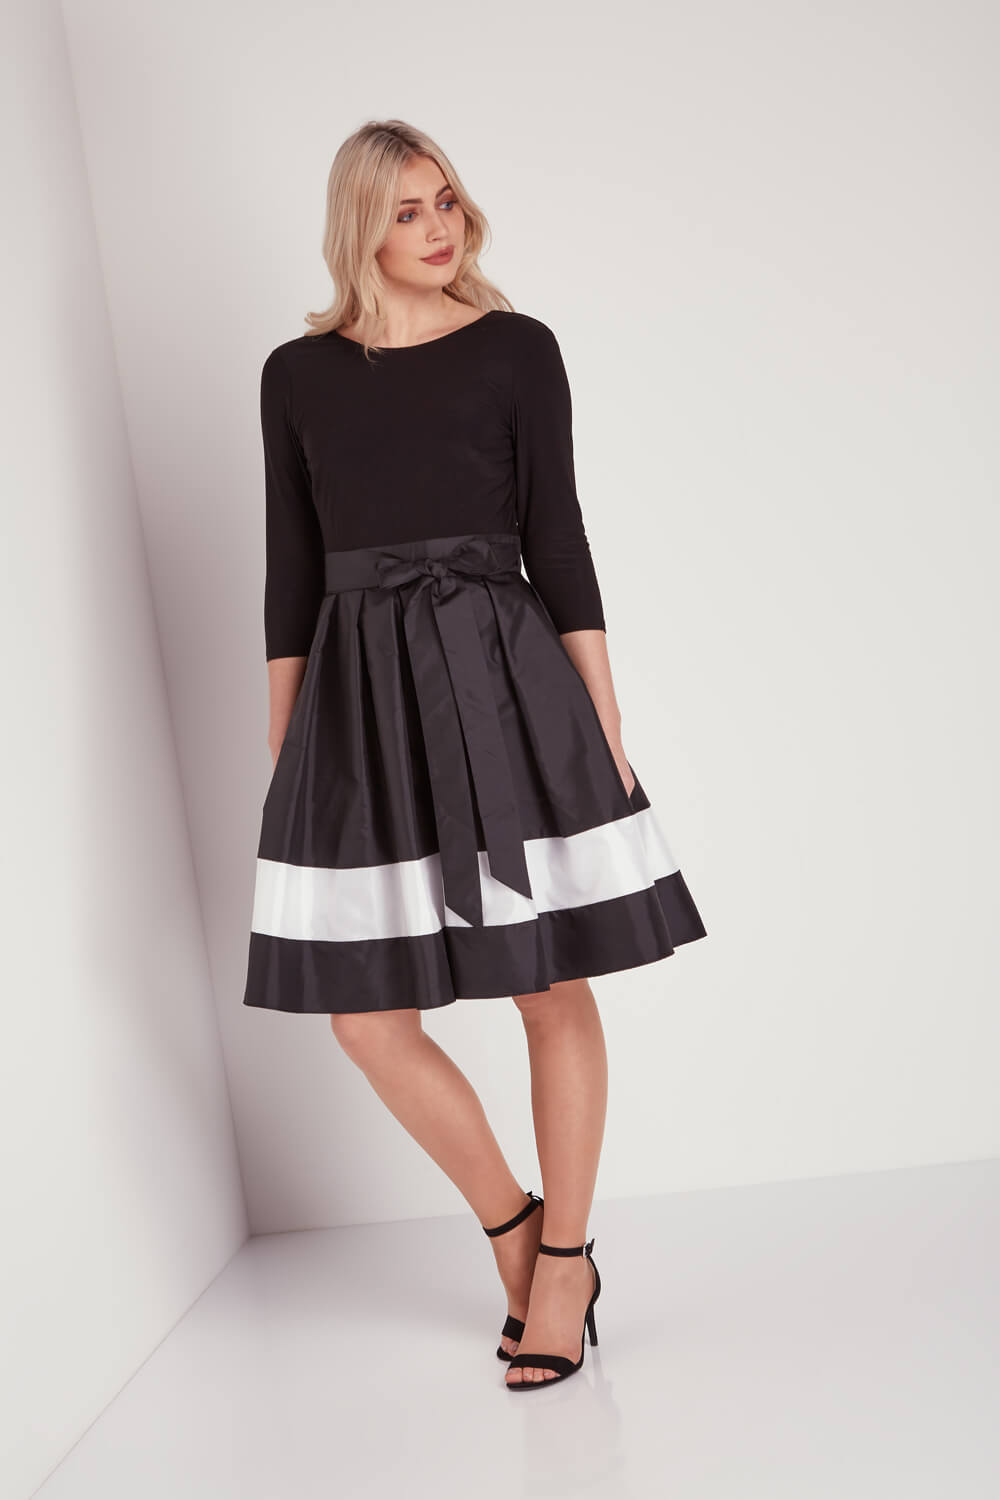 Contrast Fit and Flare Dress with Belt